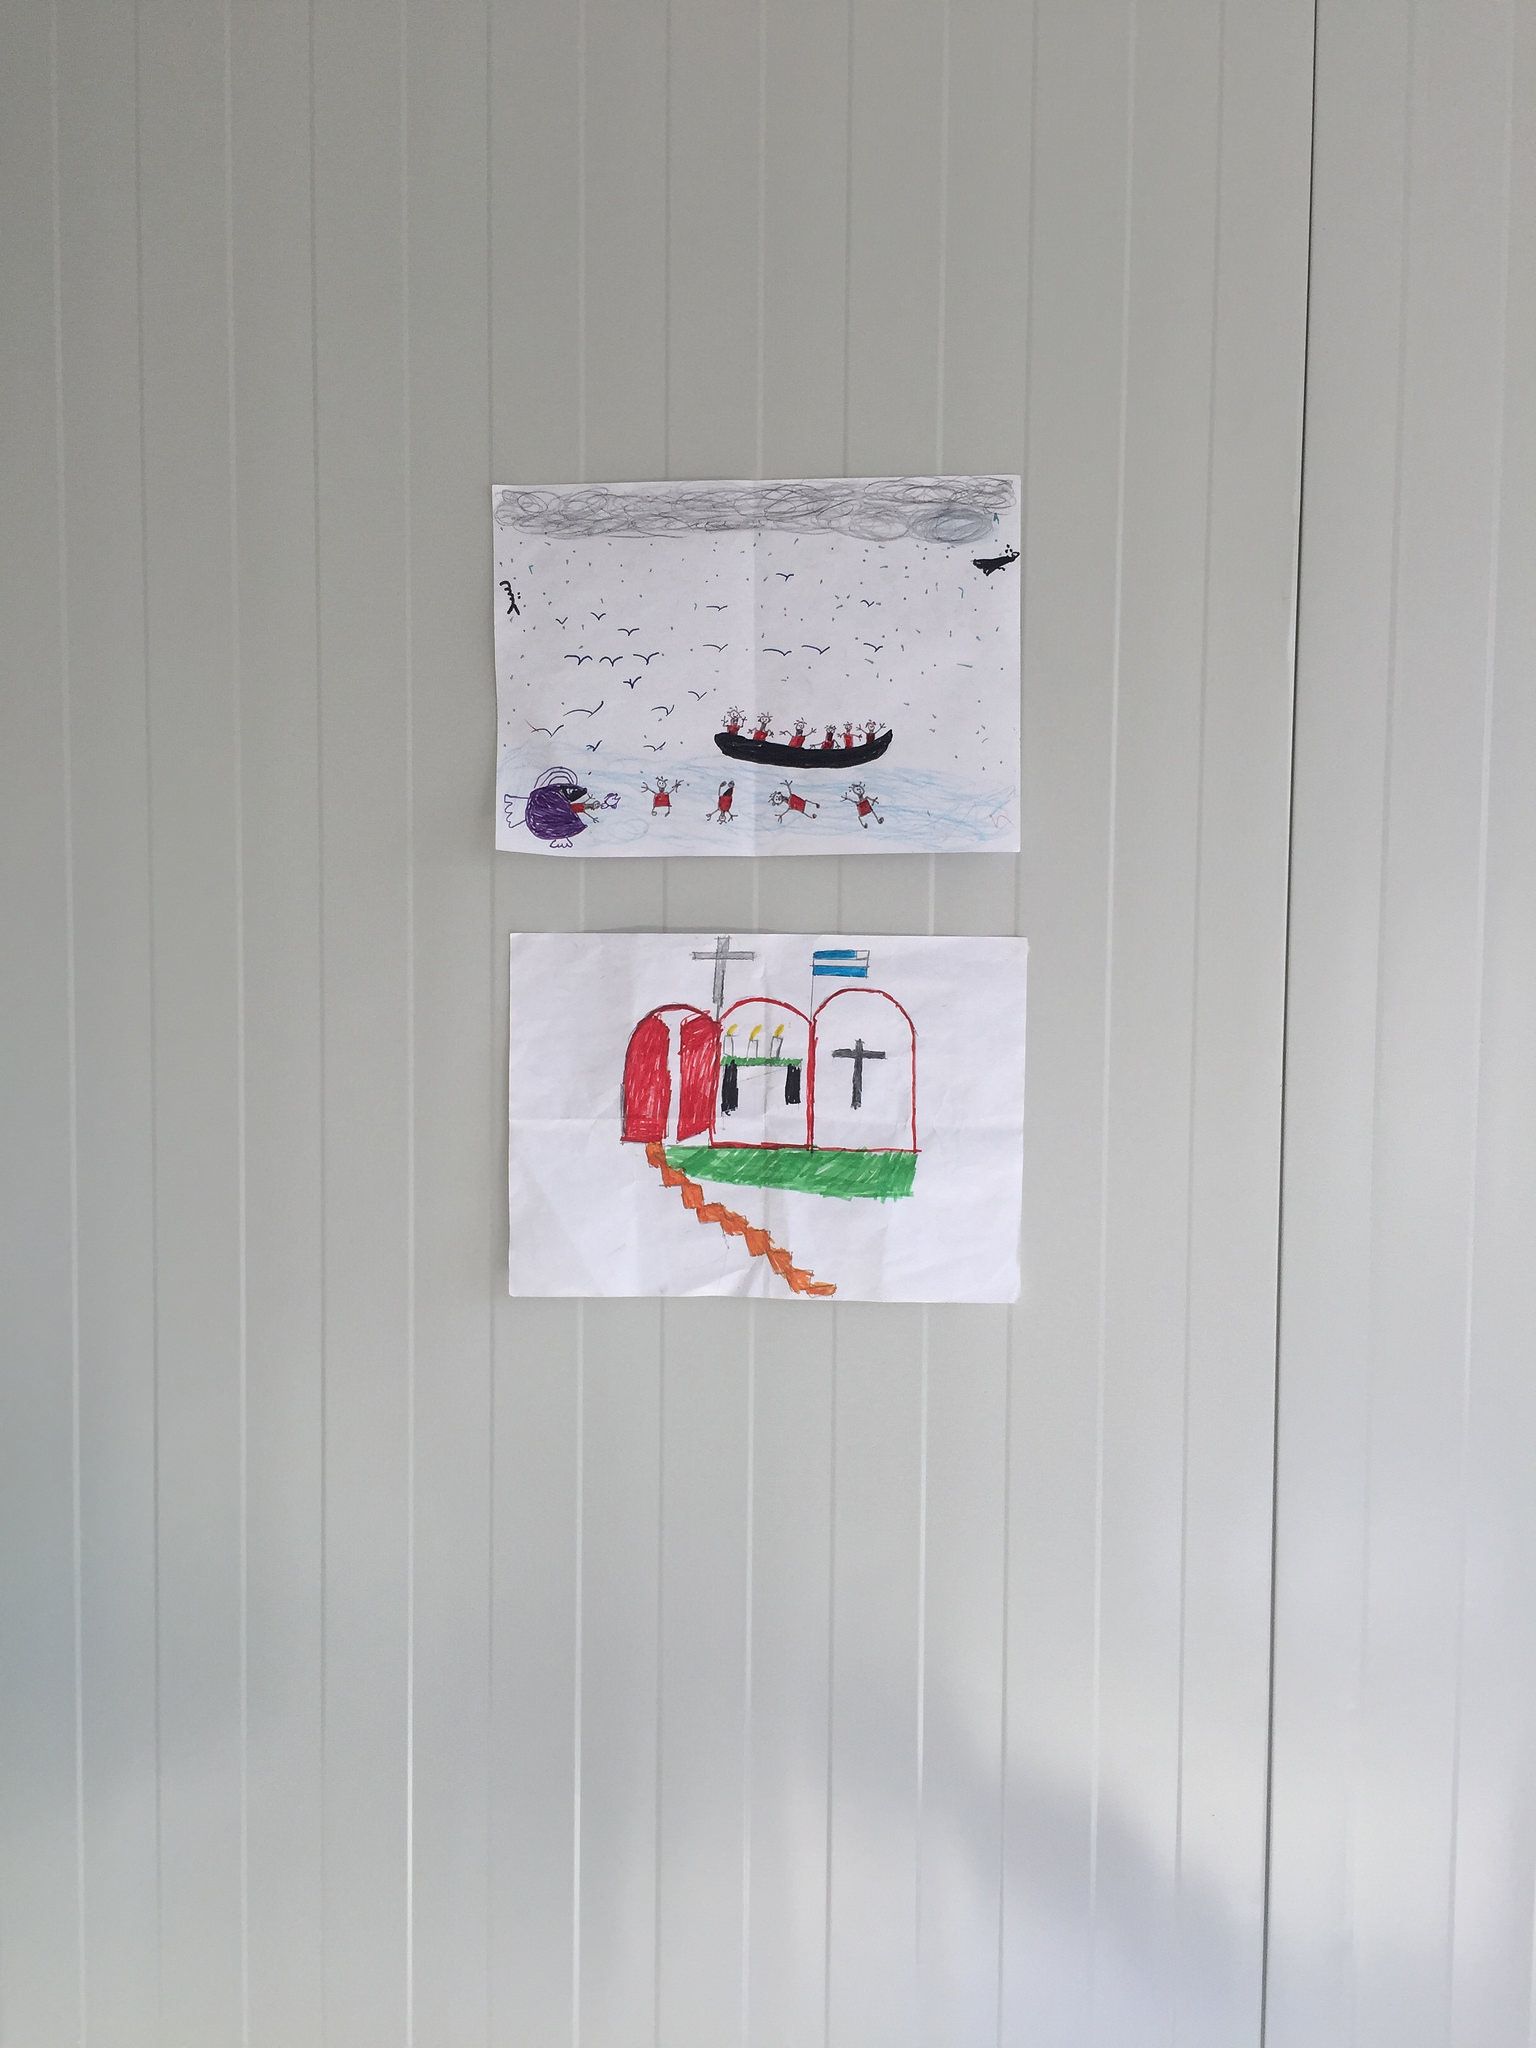 These are drawings by 14-year-old Sayeed, taped to the bare walls of a container stationed at the camp. Sayeed was planning to study engineering when he fled Kabul to escape recruitment by the Taliban. His drawing depicts a boat in the water surrounded by drowning people and sharks, a portrayal of his crossing over the Mediterranean. Over a dozen of the residents of this camp are unaccompanied minors like Sayeed. Image by Sonia Shah. Greece, 2016.